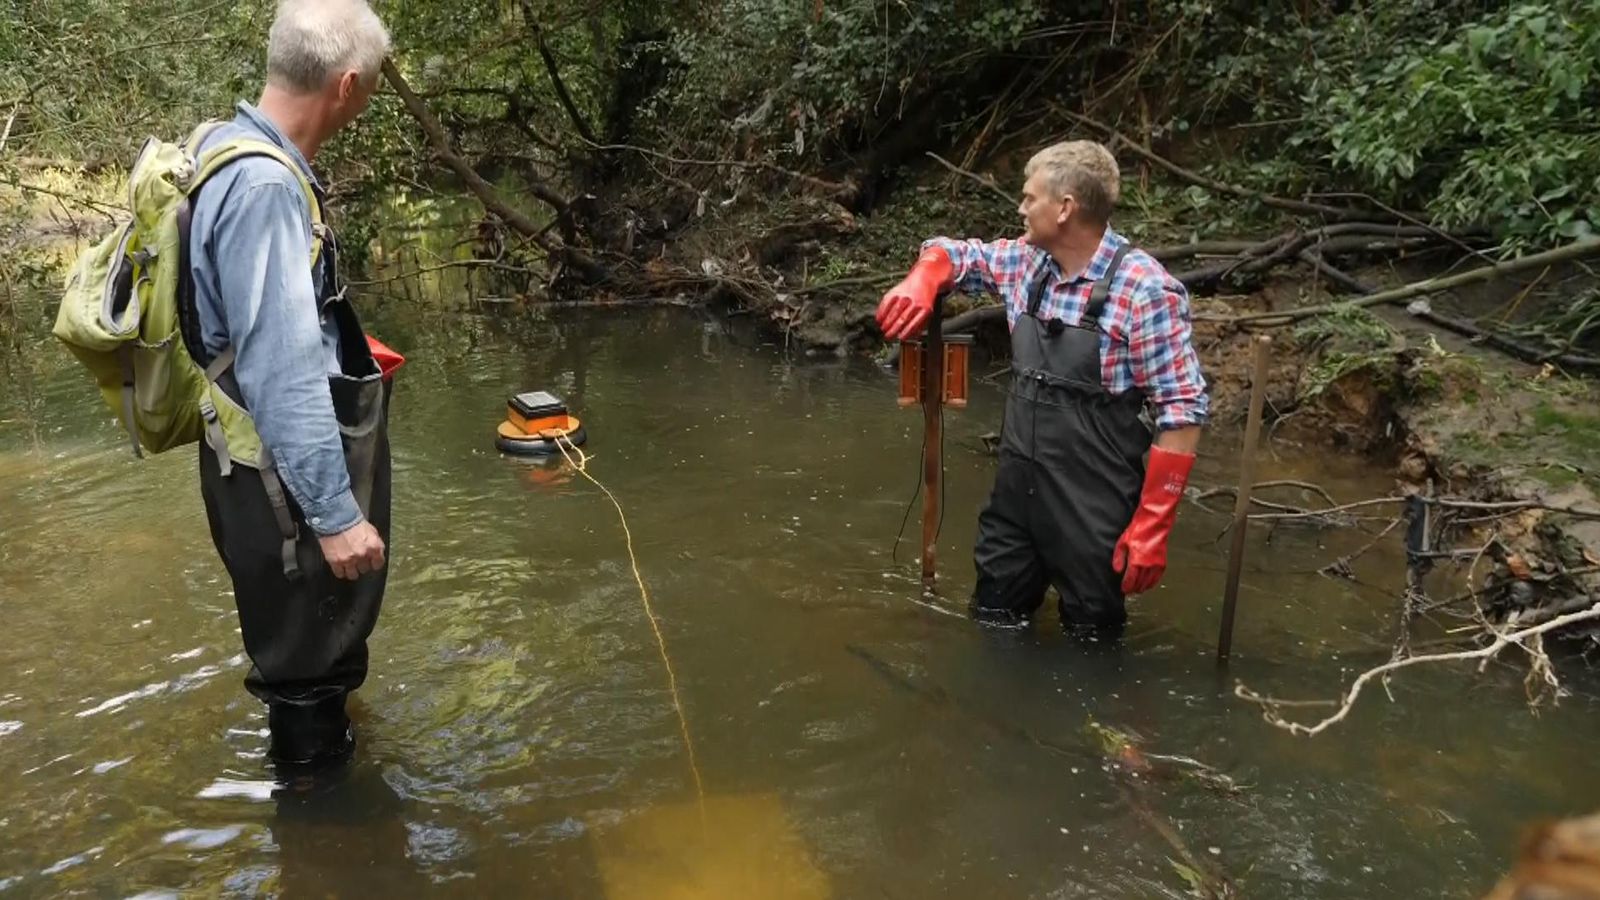 Sewage pollution: Citizen eco-warriors armed with budget shed tech patrol whiffy river frontline